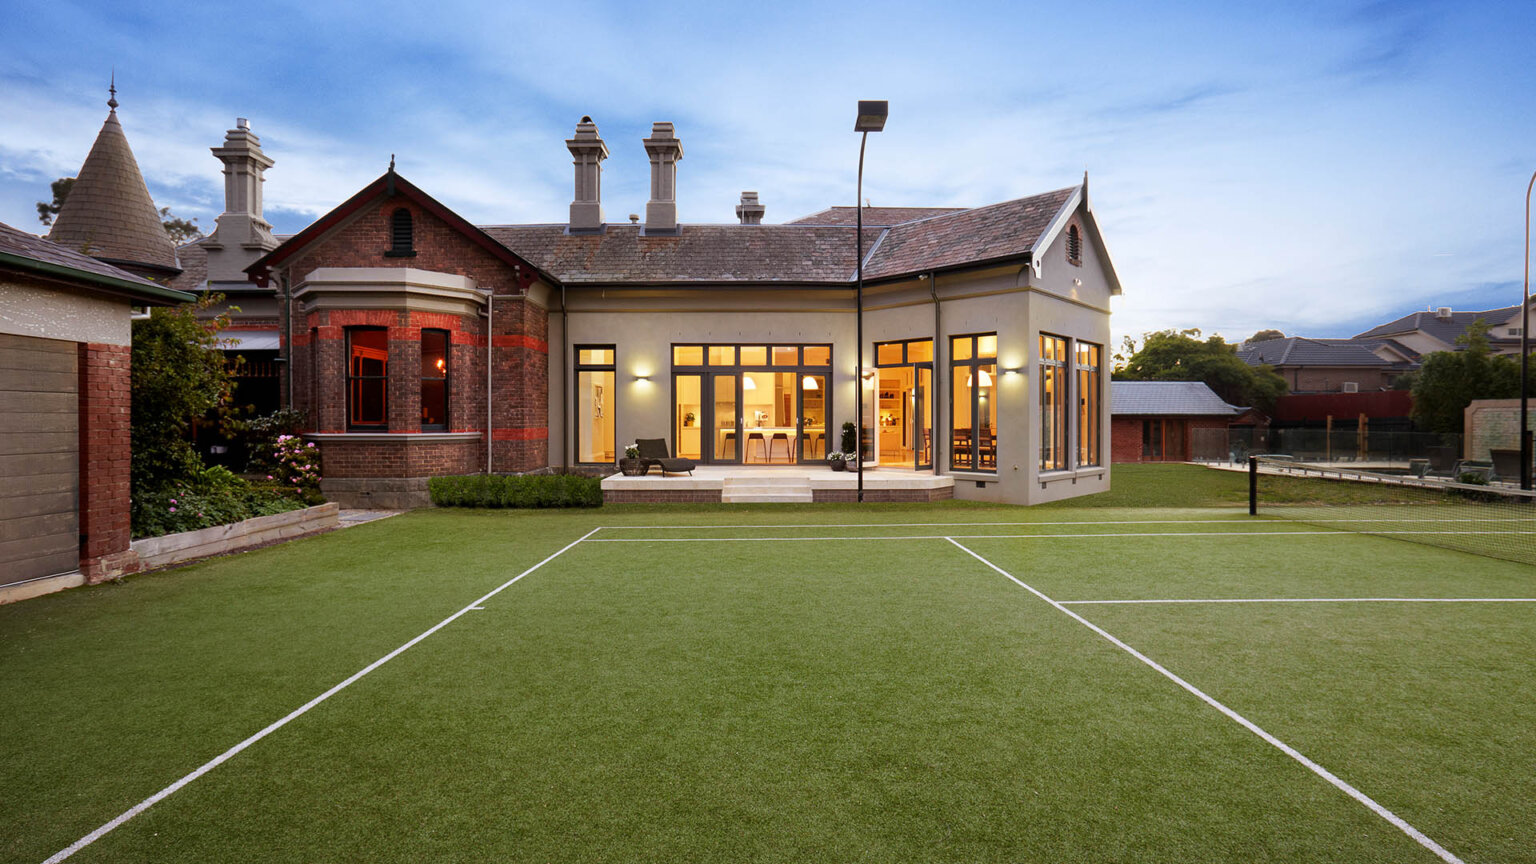 Hawthorn extension and renovations - outside view of tennis court and house